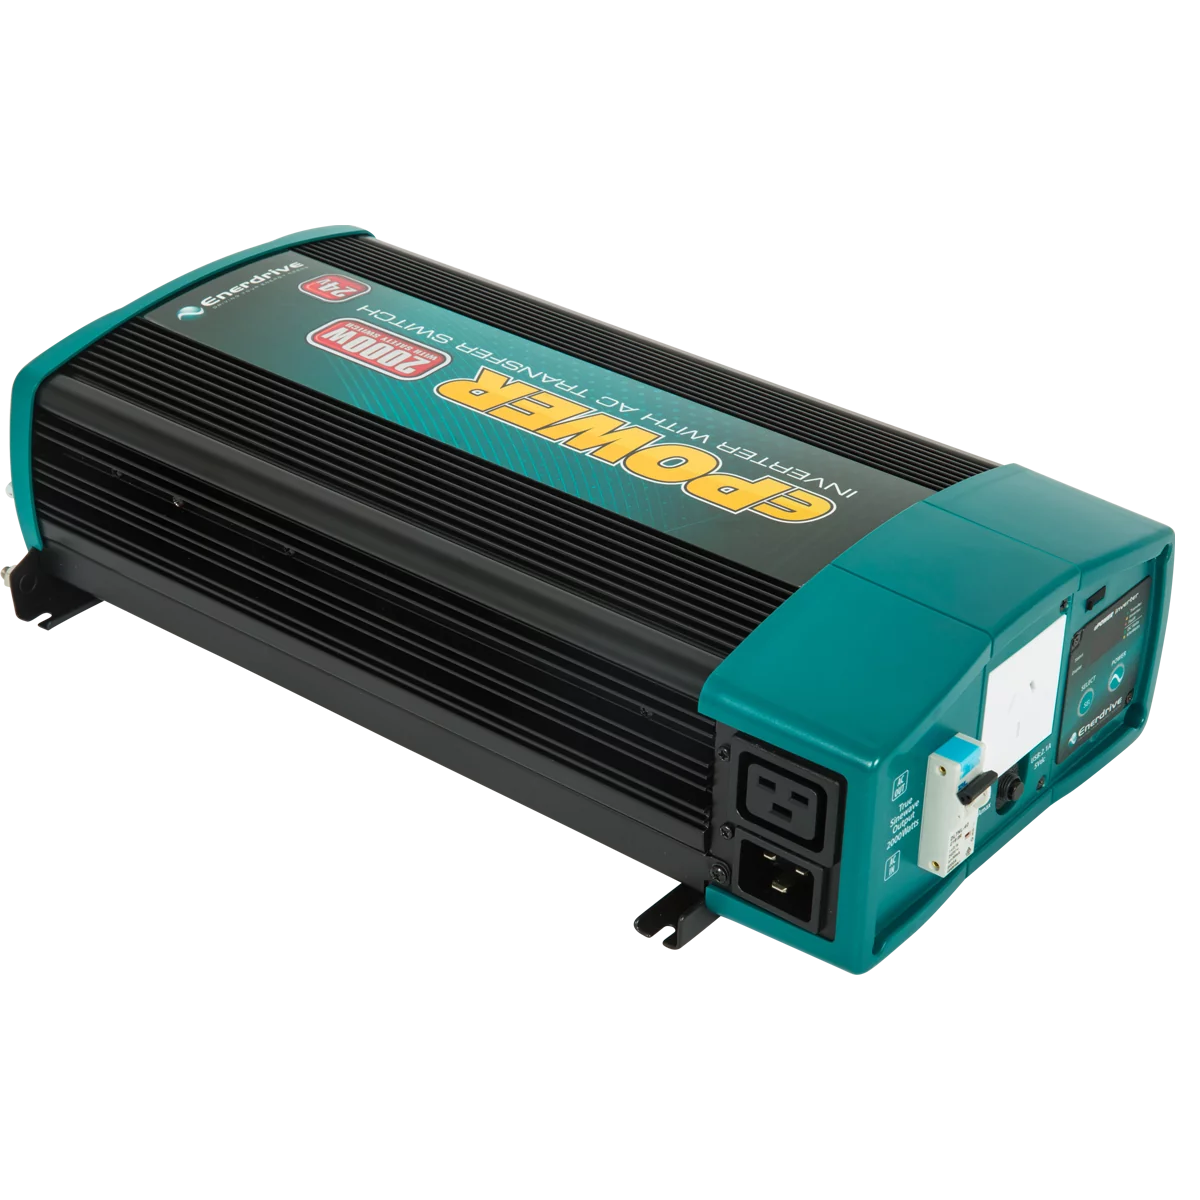 Enerdrive ePOWER 12V to 240V 2000W Pure Sine Wave Inverter with RCD & AC Transfer Switch